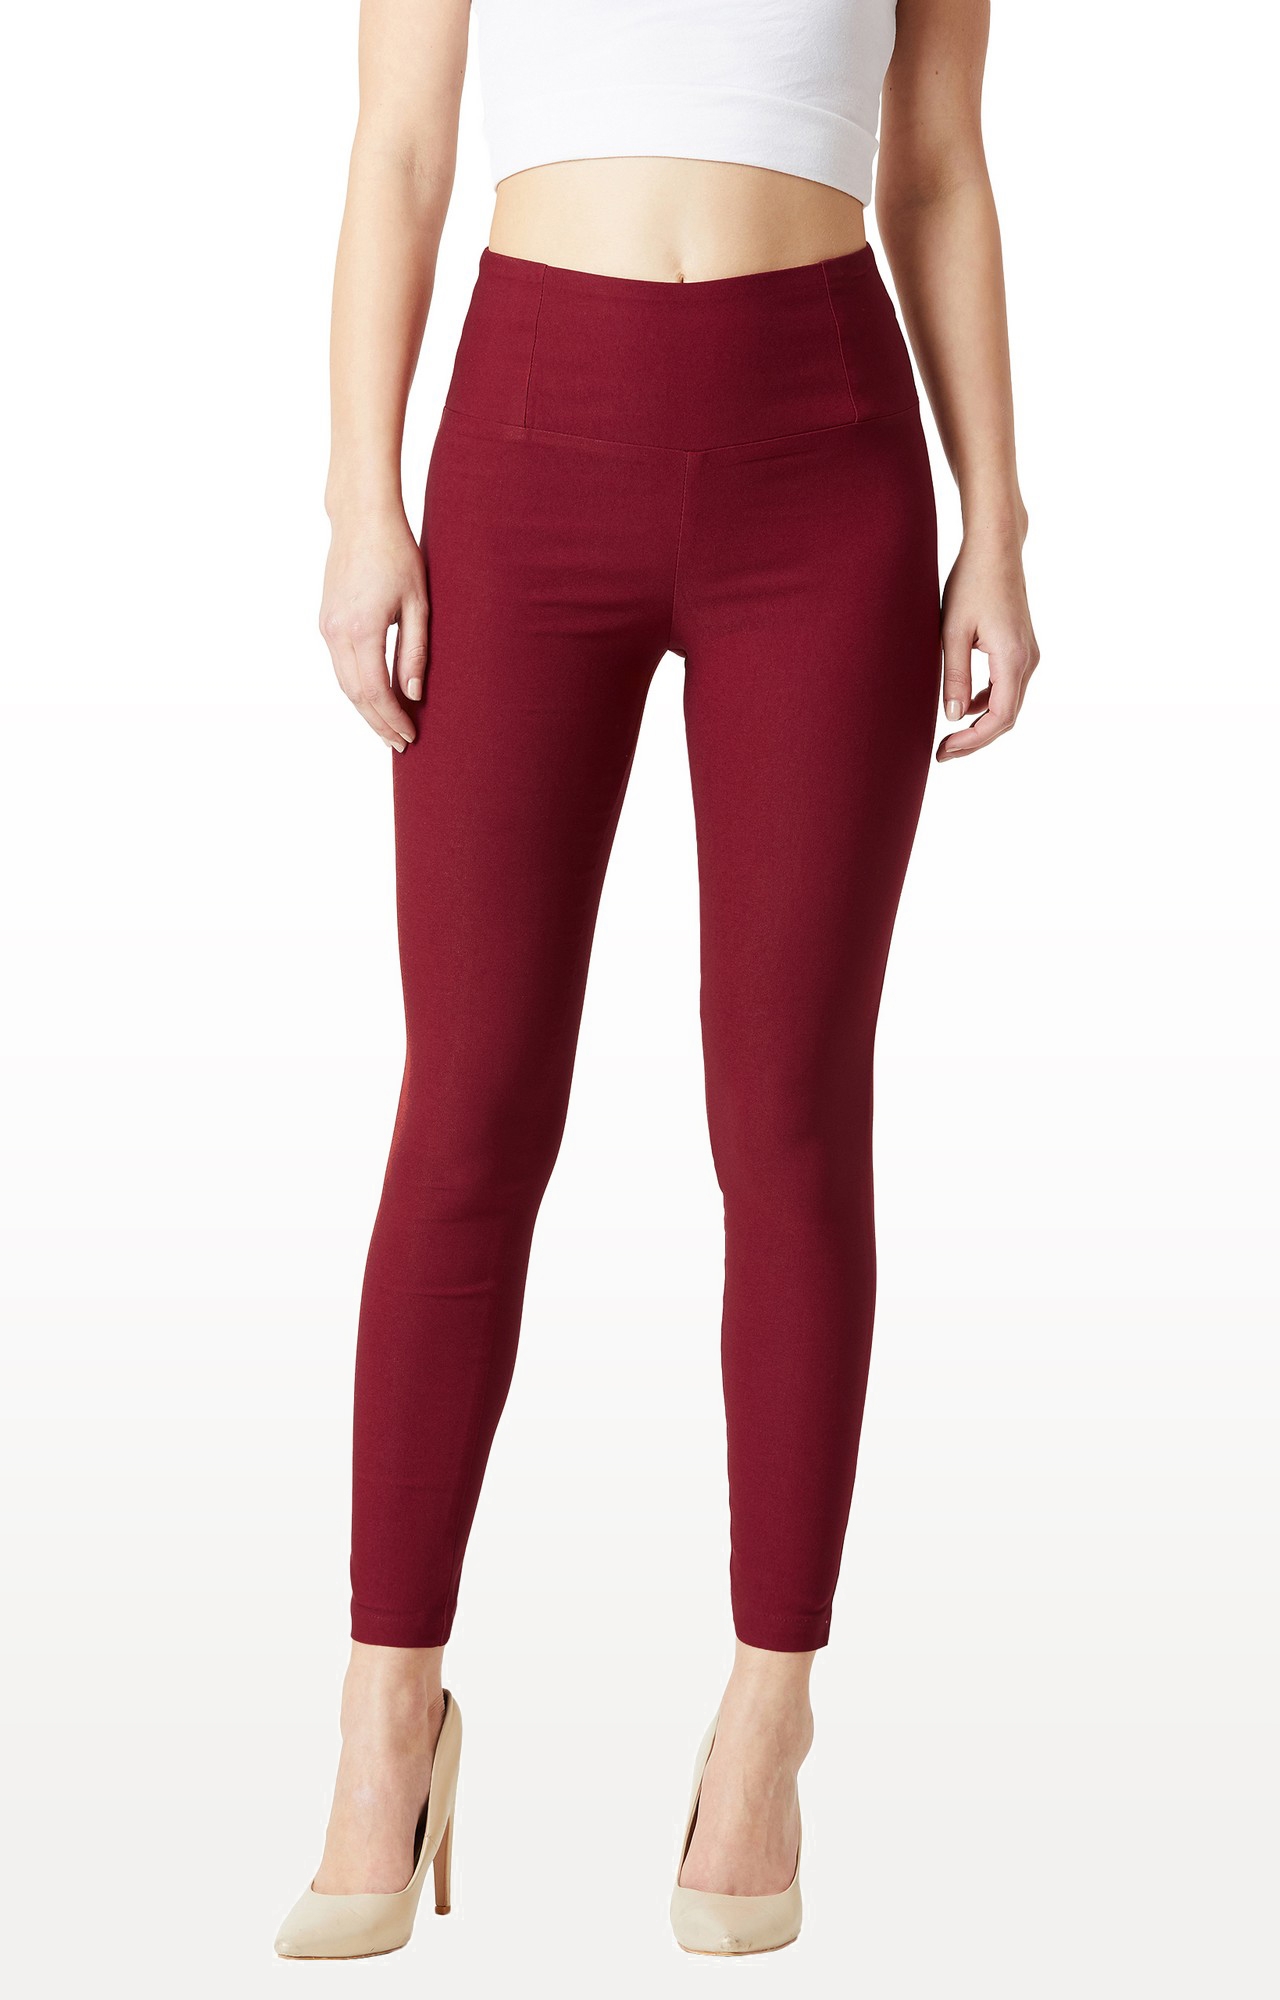 MISS CHASE | Maroon Solid High Waist Regular Length Patch Pocket Jeggings